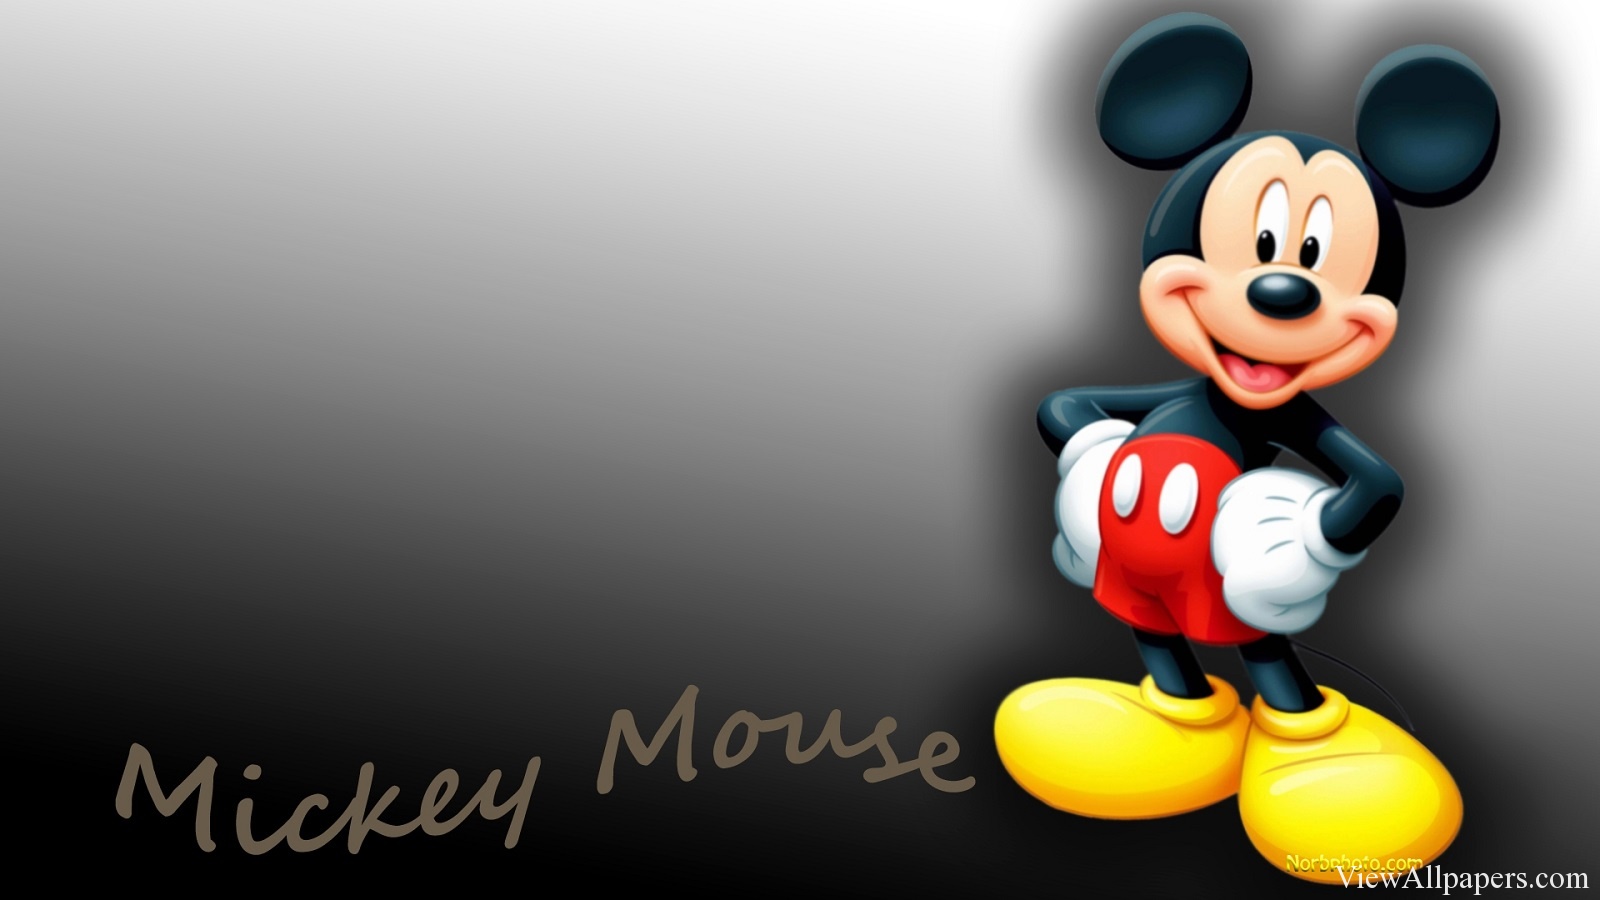 Wallpaper Mickey Mouse Disney For Pc Puters Desktop